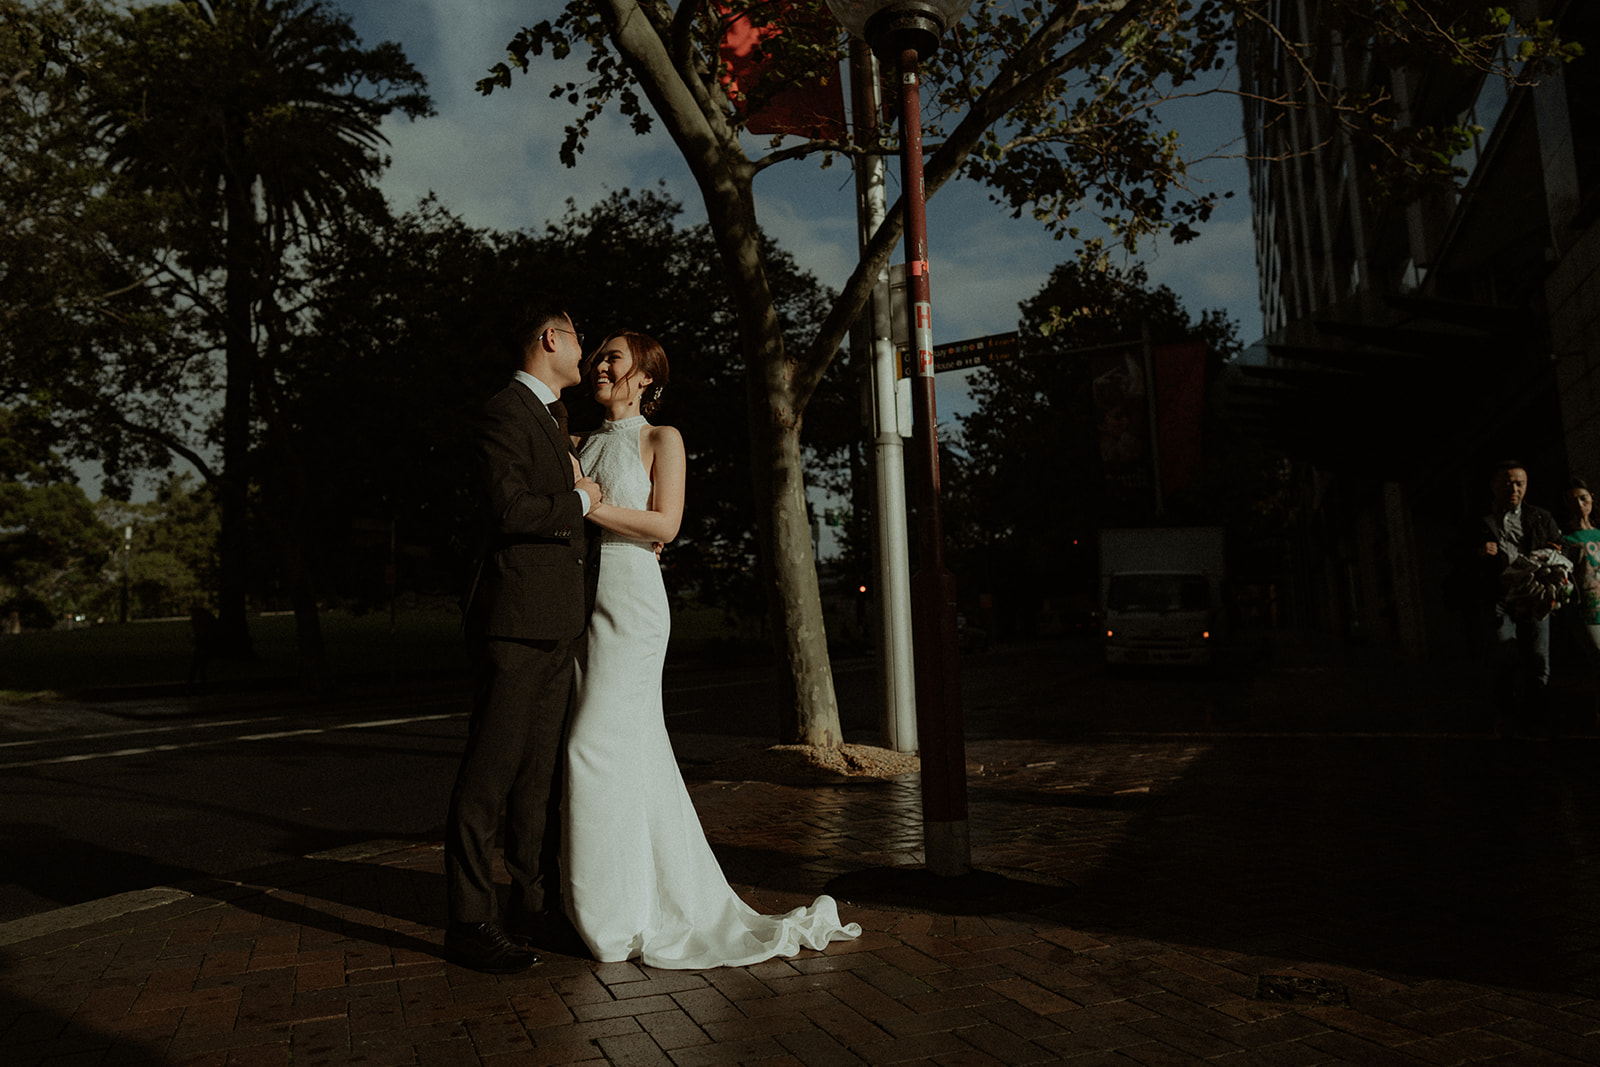 Bride and groom in harsh sunlight, creating a moody scene